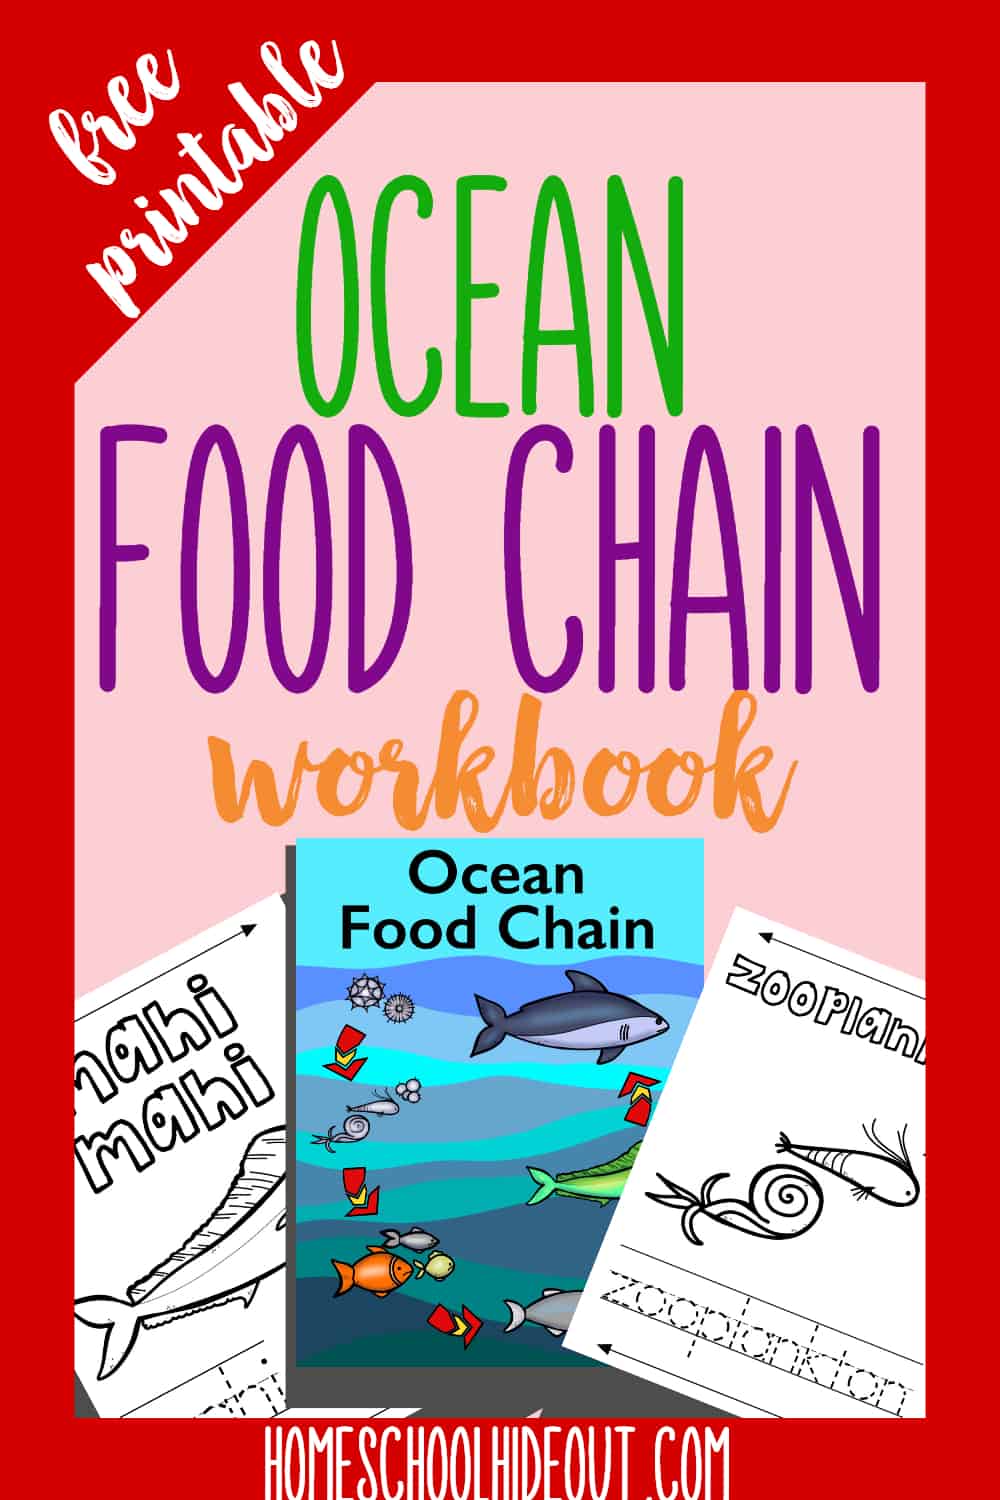 Learn about the ocean food chain with this quick and easy printable workbook! #homeschool #ocean #freeprintables #marinelife